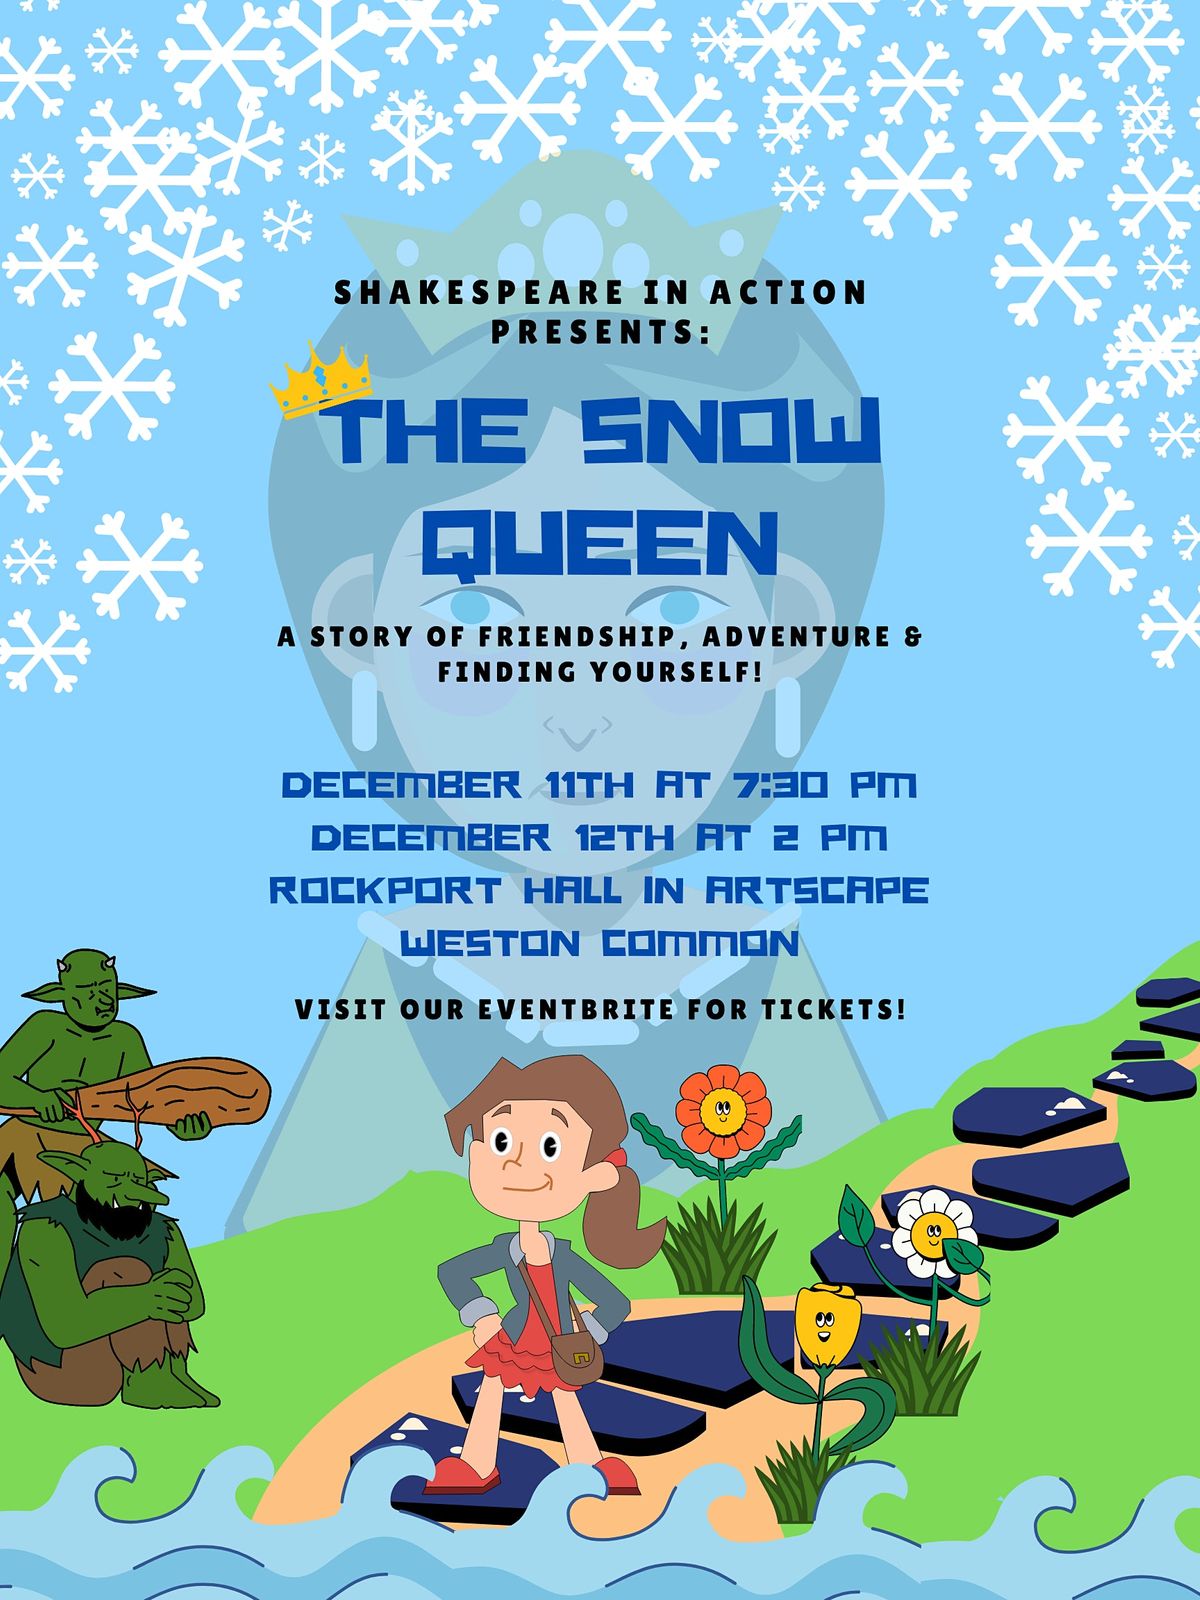 Shakespeare in Action Presents:  The Snow Queen